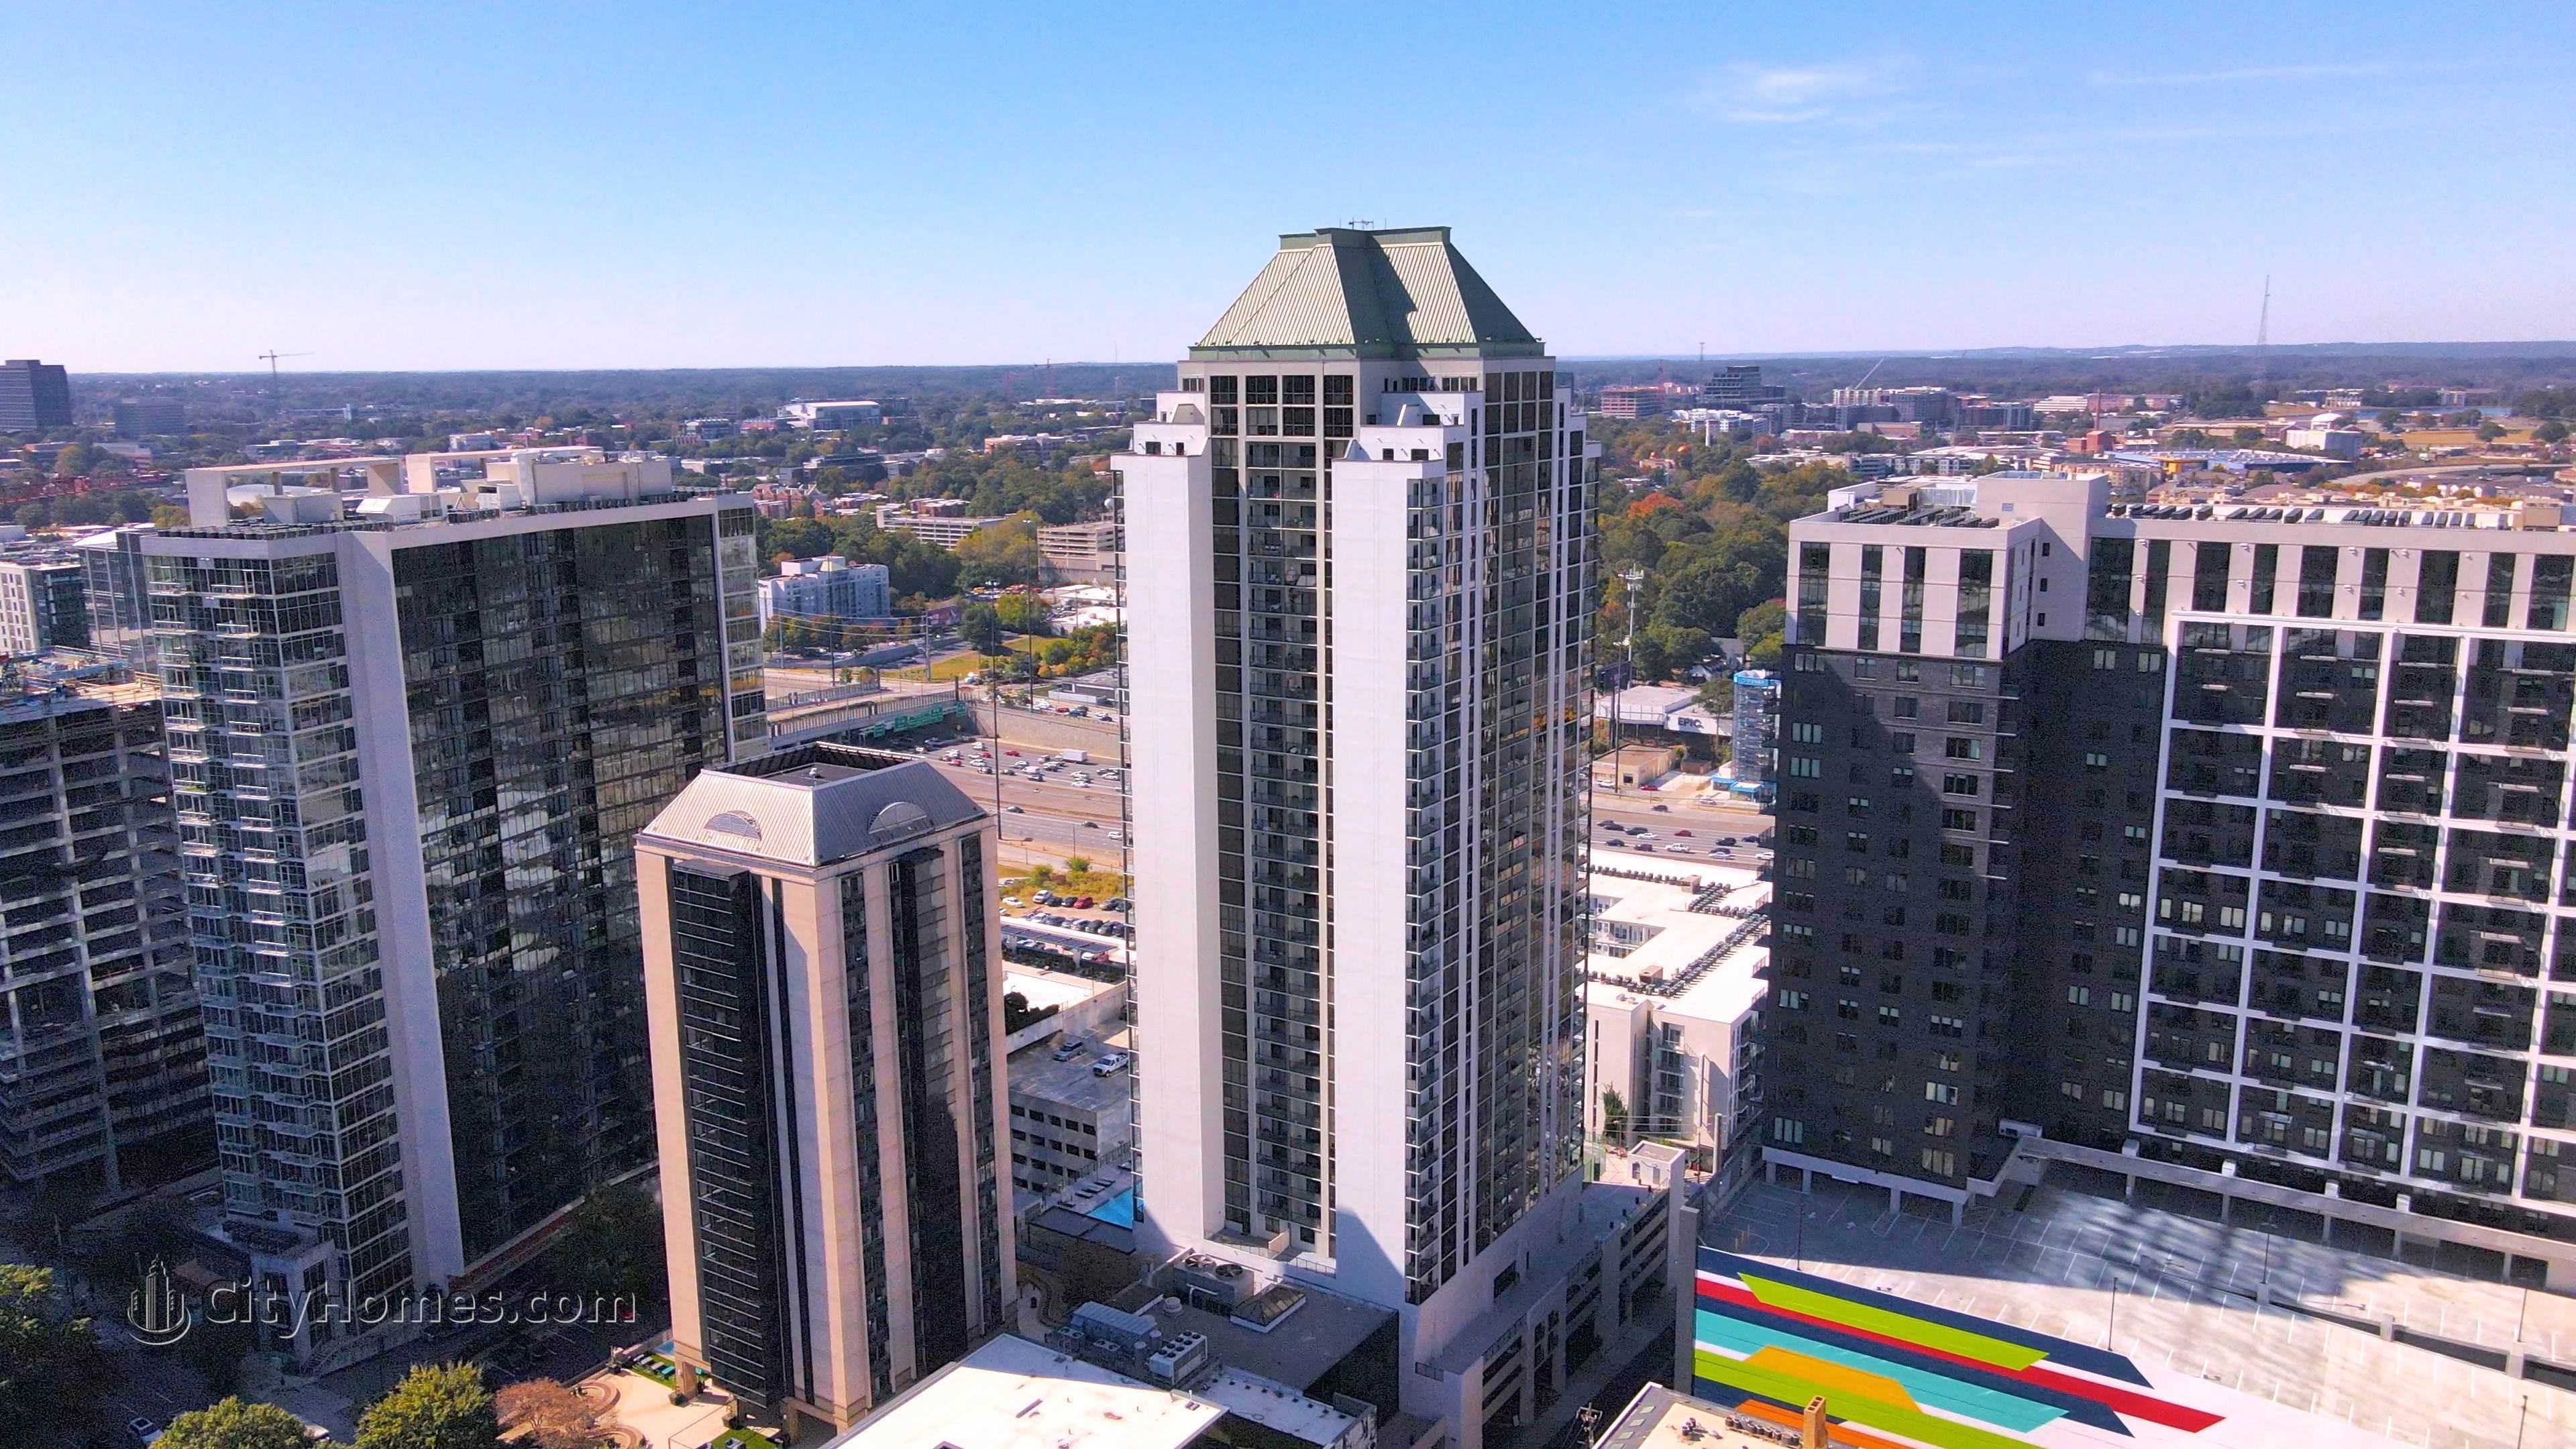 4. 1280 West Condos bâtiment à 1280 West Peachtree St NW, Greater Midtown, Atlanta, GA 30309